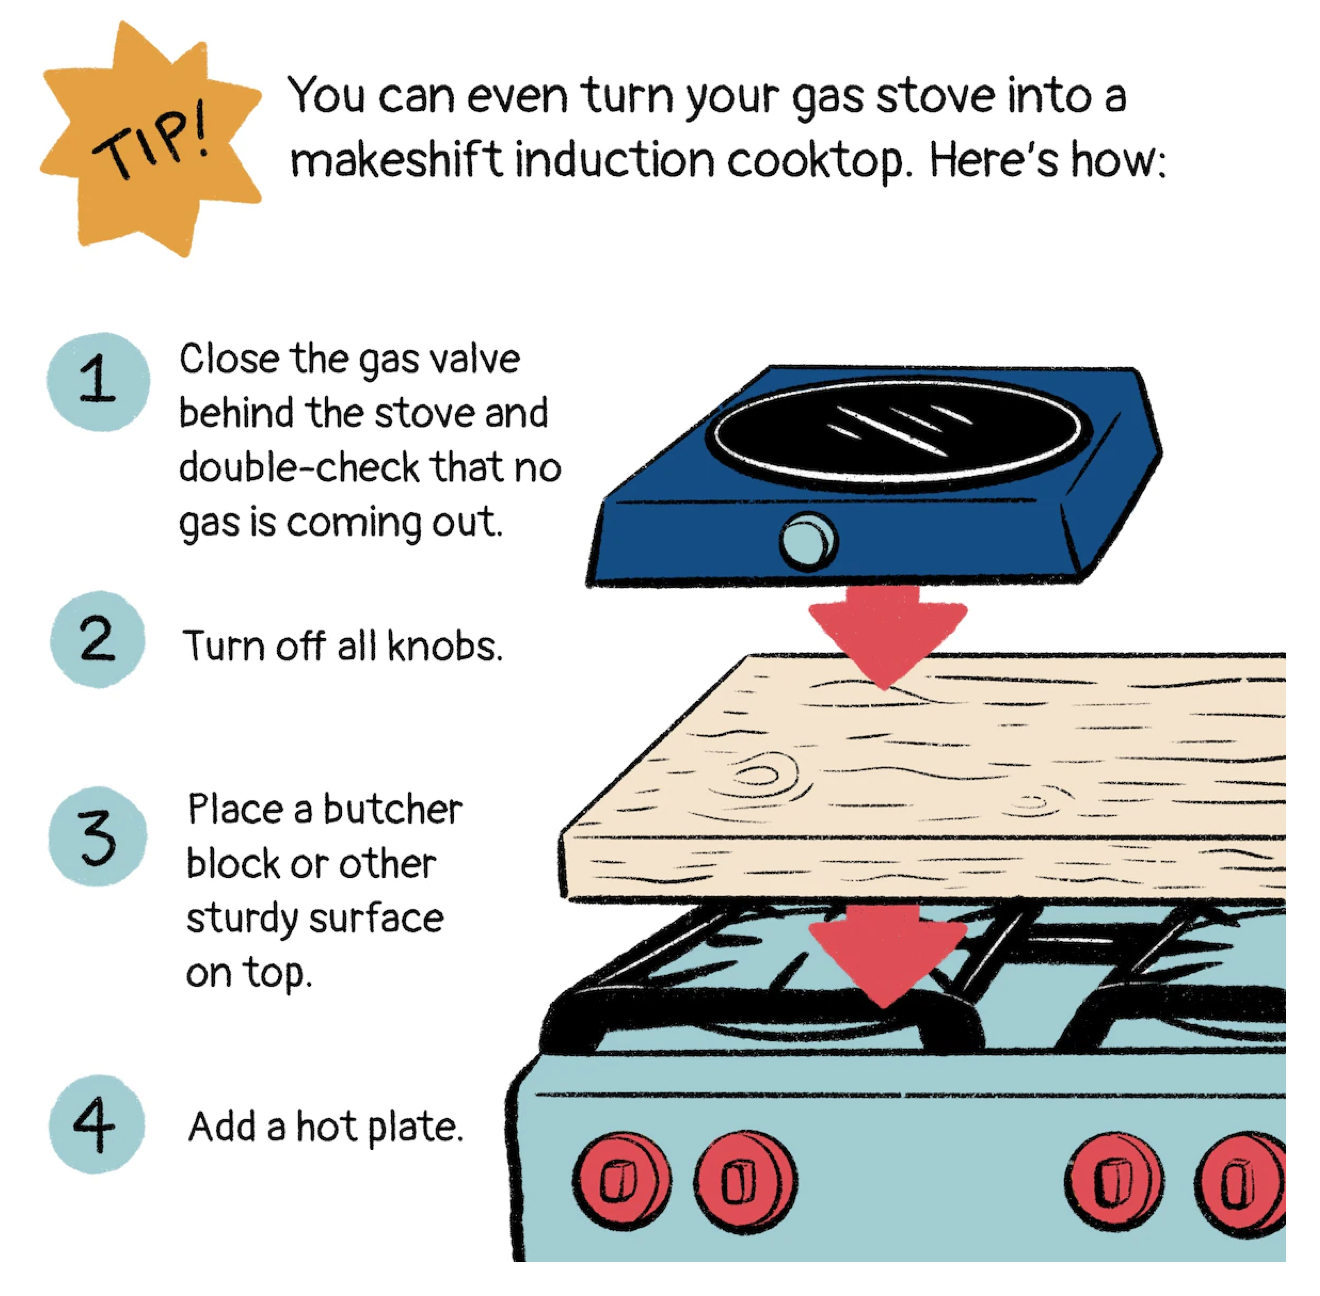 Worried about your gas stove but not ready to replace it? Here's an amazing workaround that I bet you never thought of.